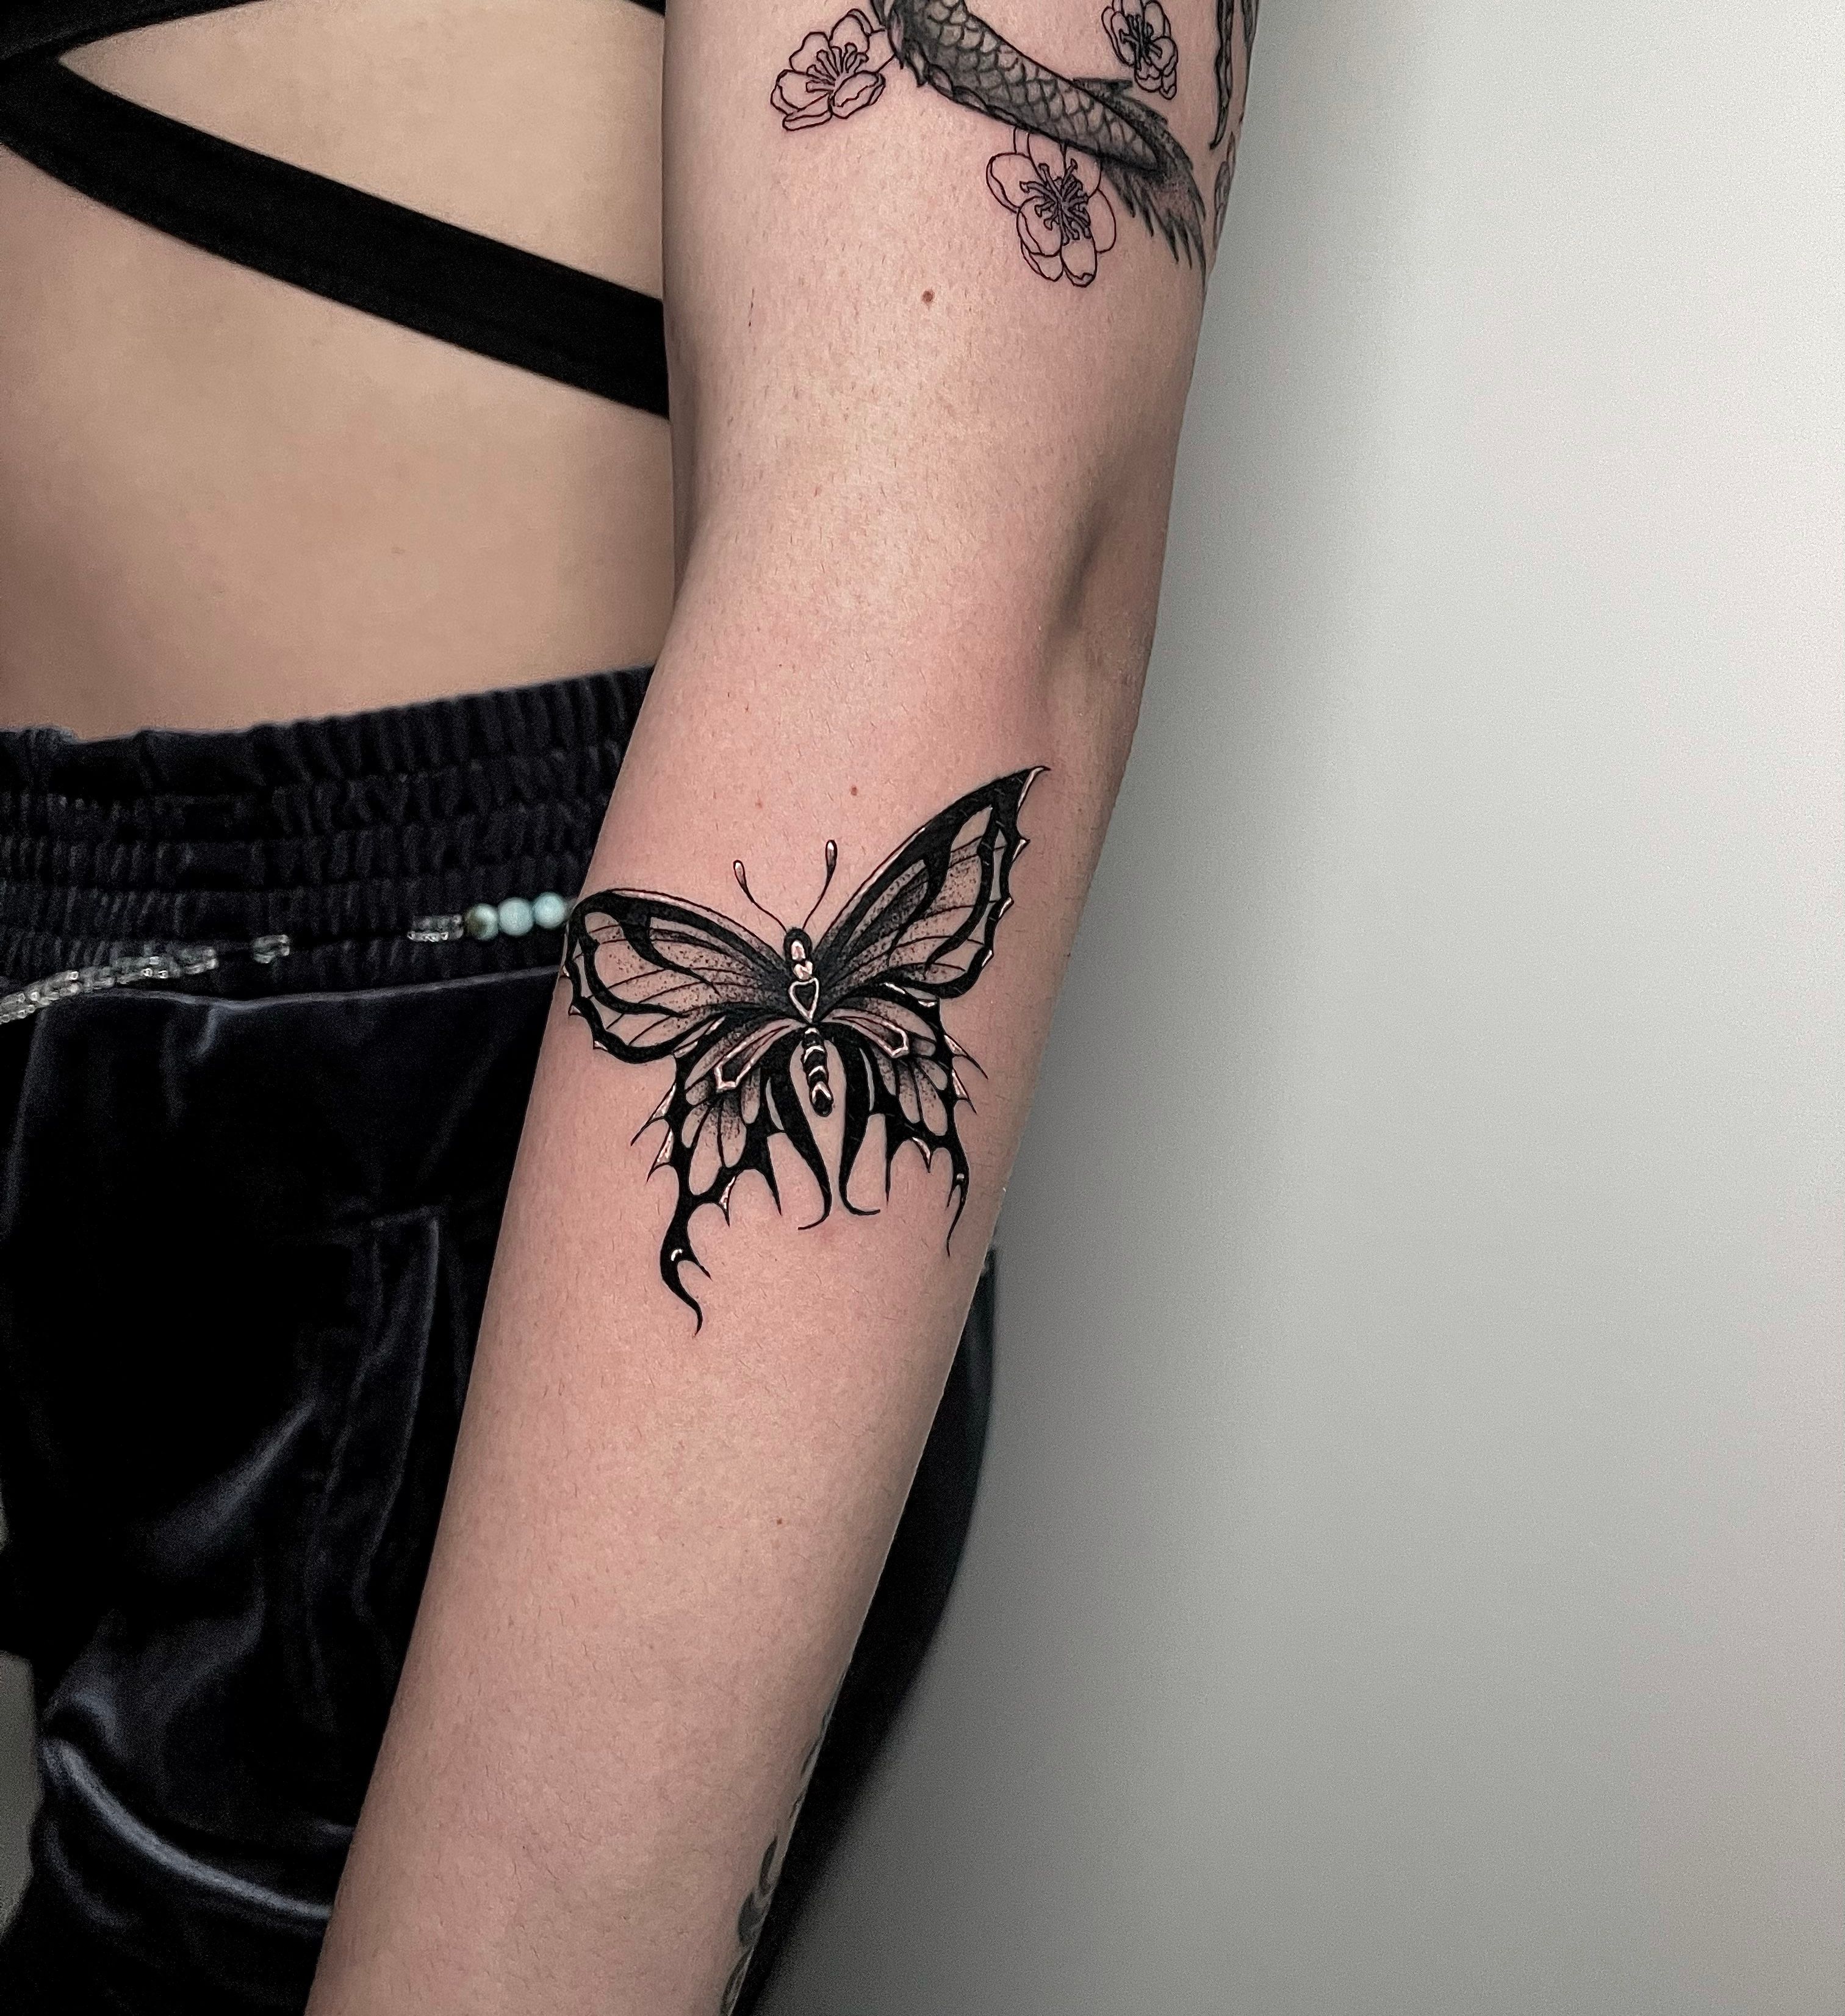 11 Tribal Butterfly Tattoo Ideas That Will Blow Your Mind  alexie